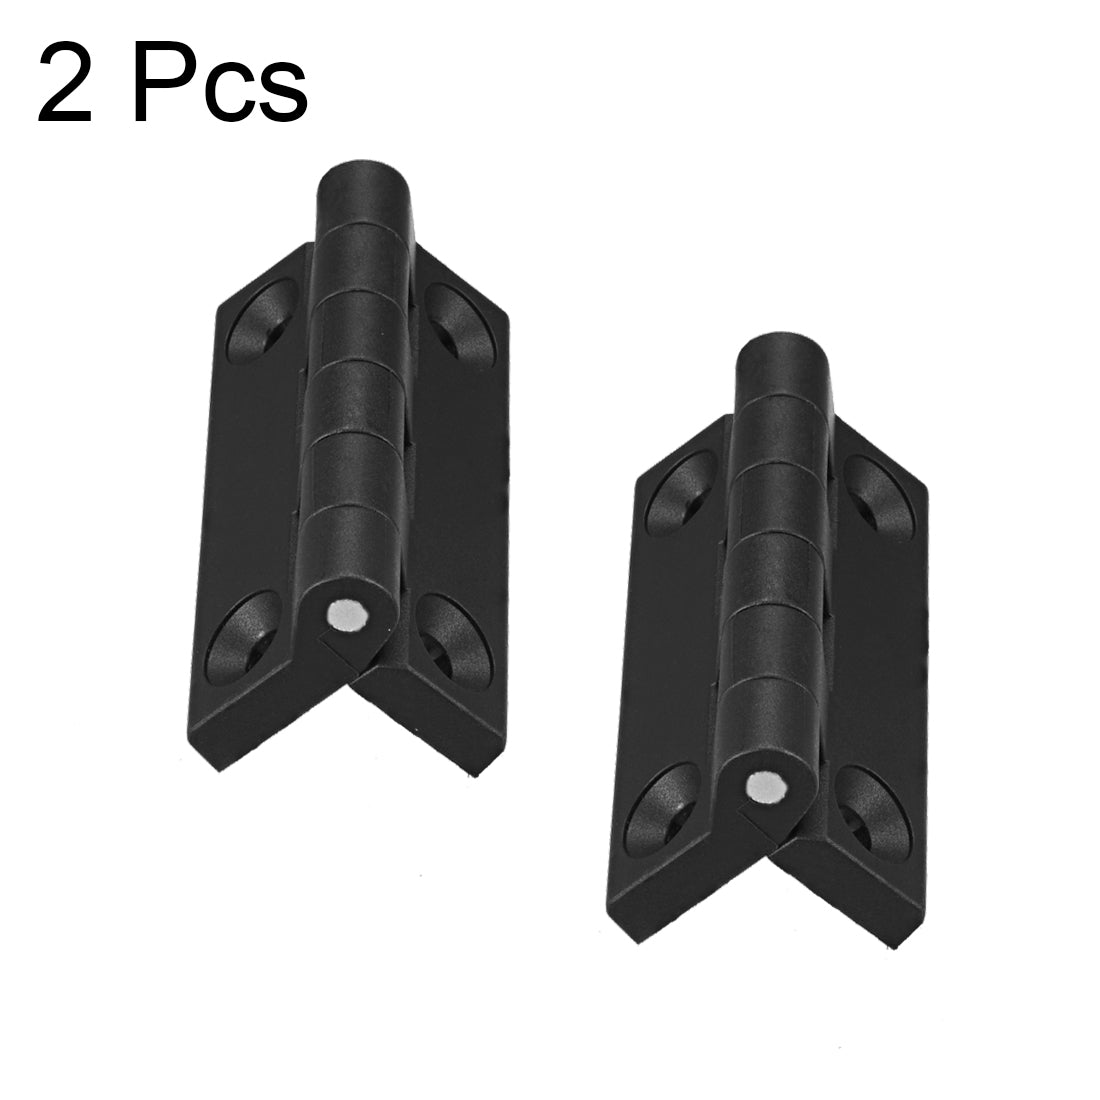 uxcell Uxcell 2pcs Cabinet Gate Closet Door 102mm Length ABS Nylon Hinge